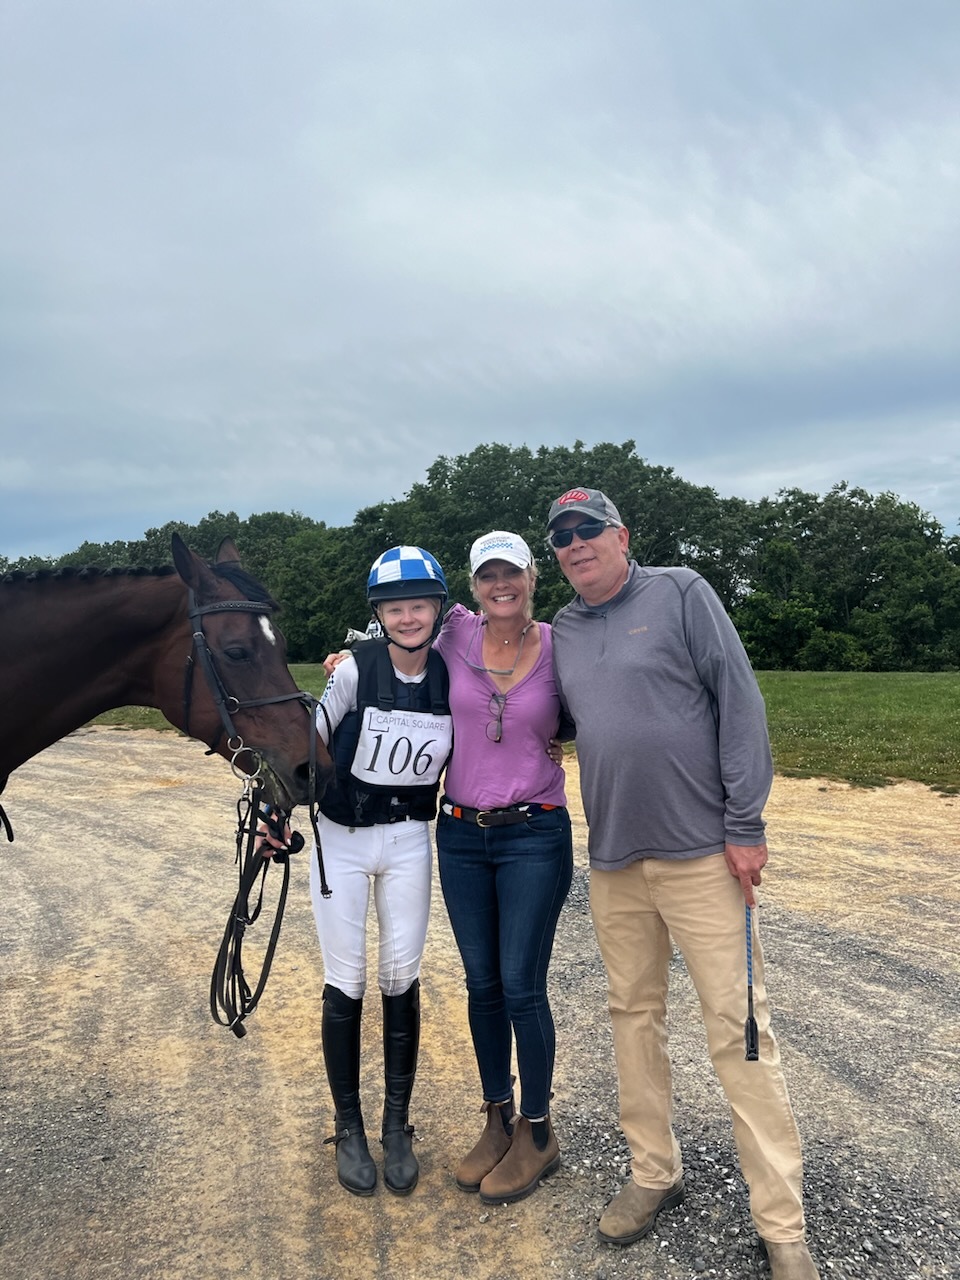 Allen's parents, Lauren and Bill Allen, have been hugely supportive of her competitive pursuits. Photo courtesy of Claire Allen